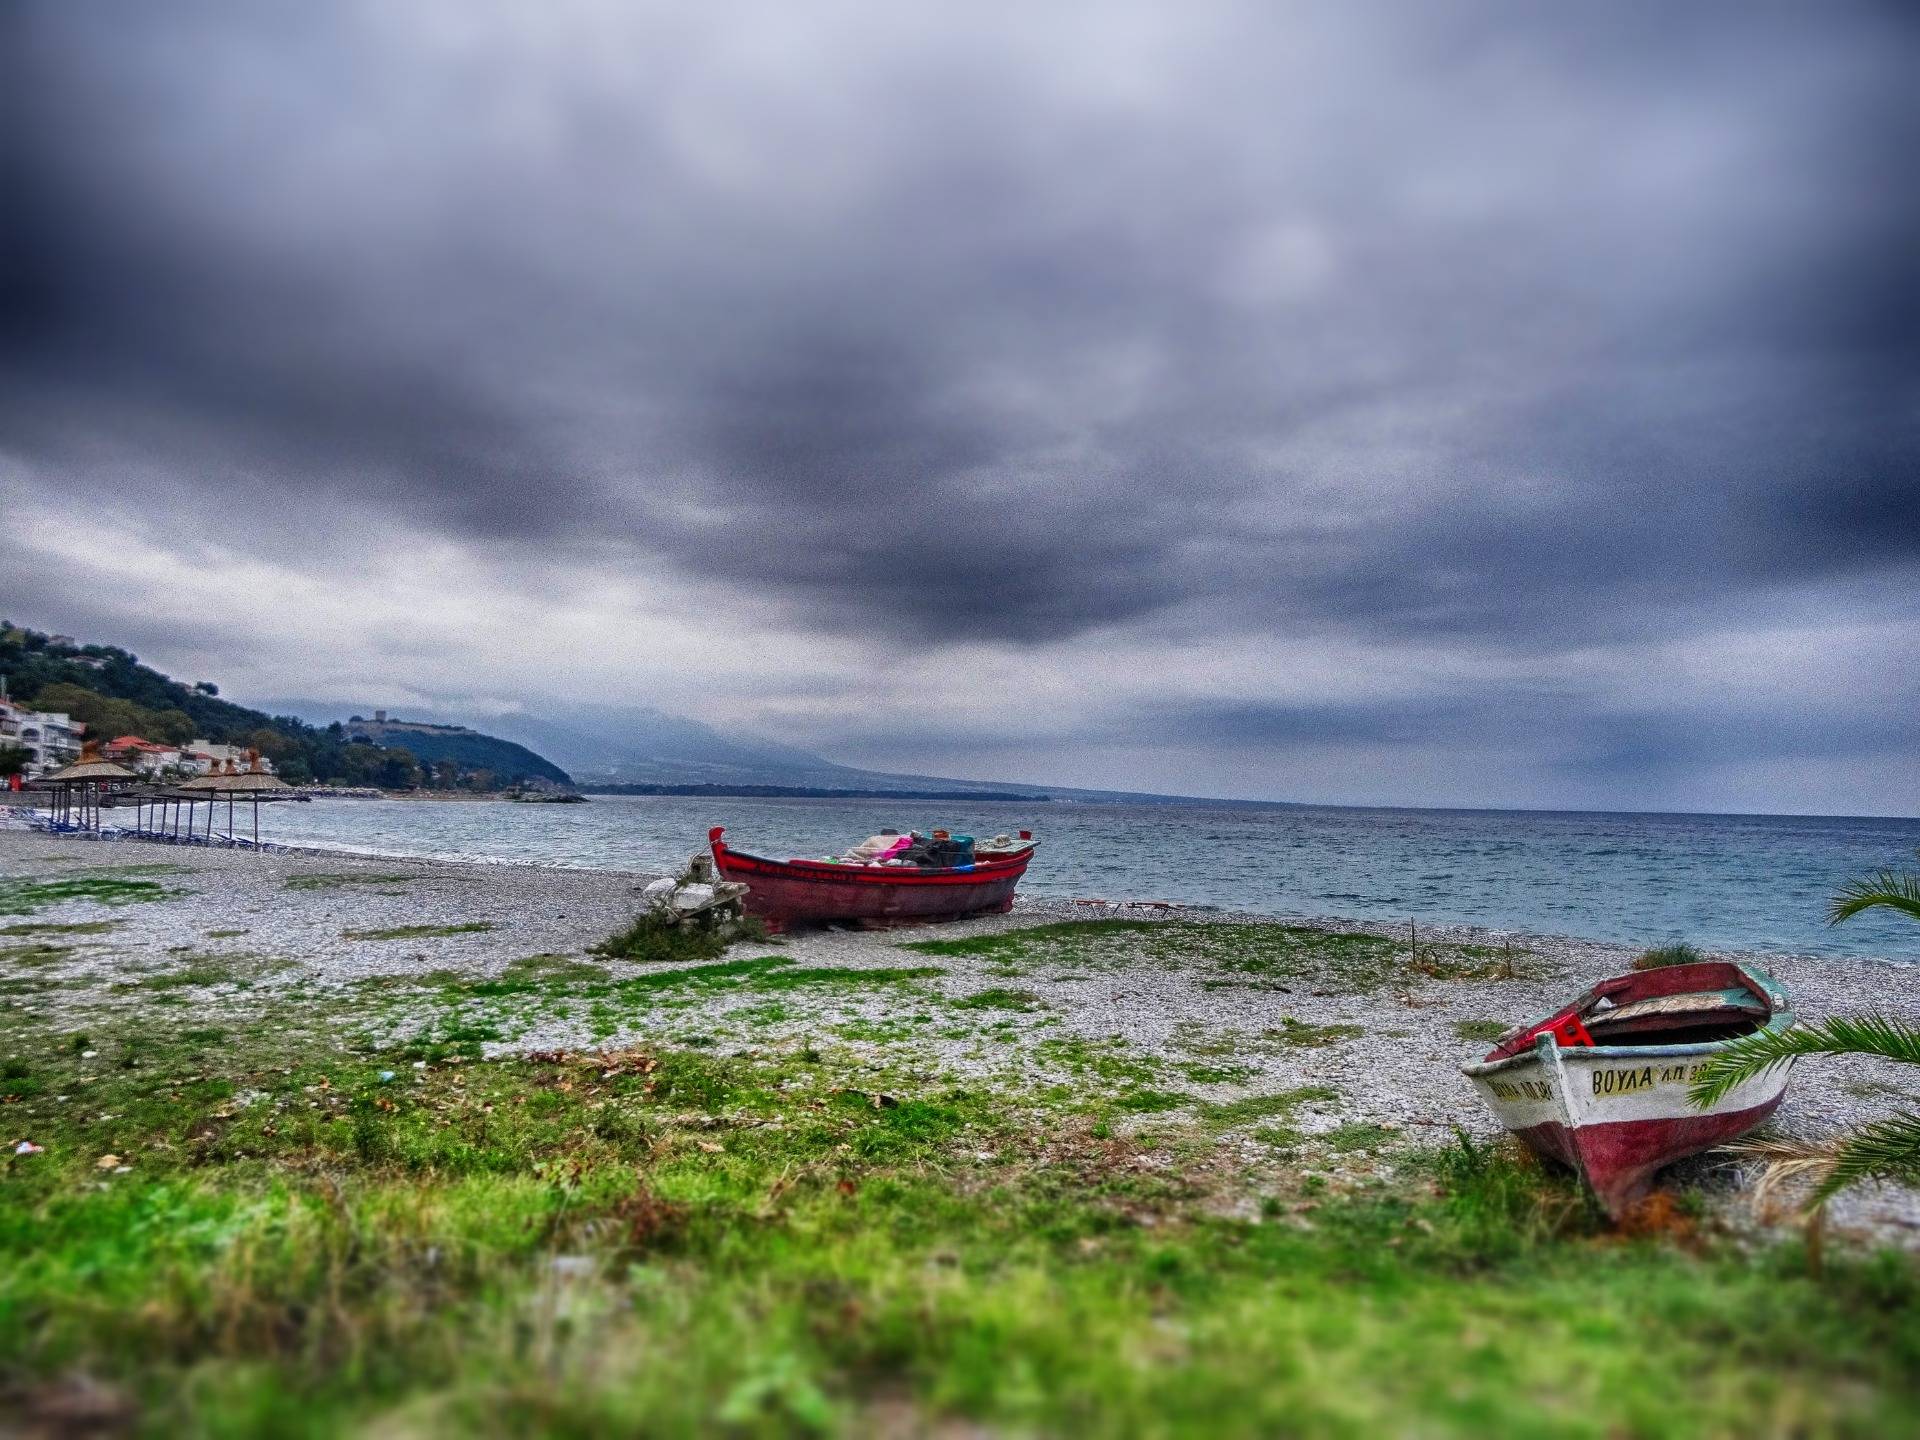 Two lost boats swimming at the shore